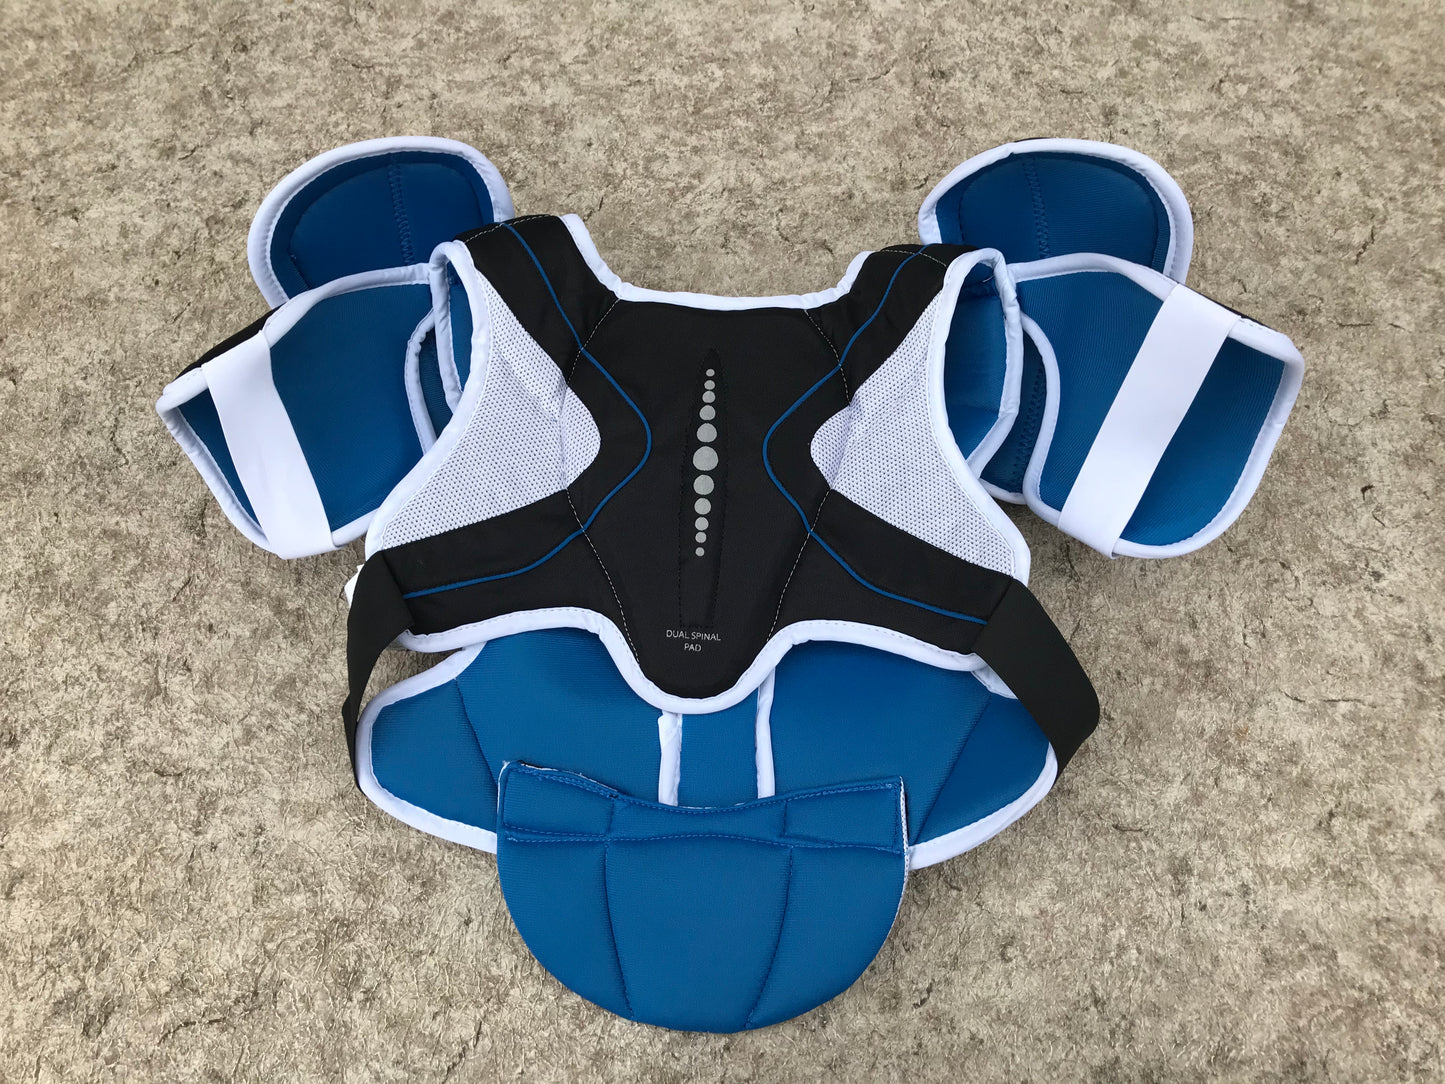 Hockey Chest Pad Ladies Size Large Bauer One 35 Blue Black White New With Tags